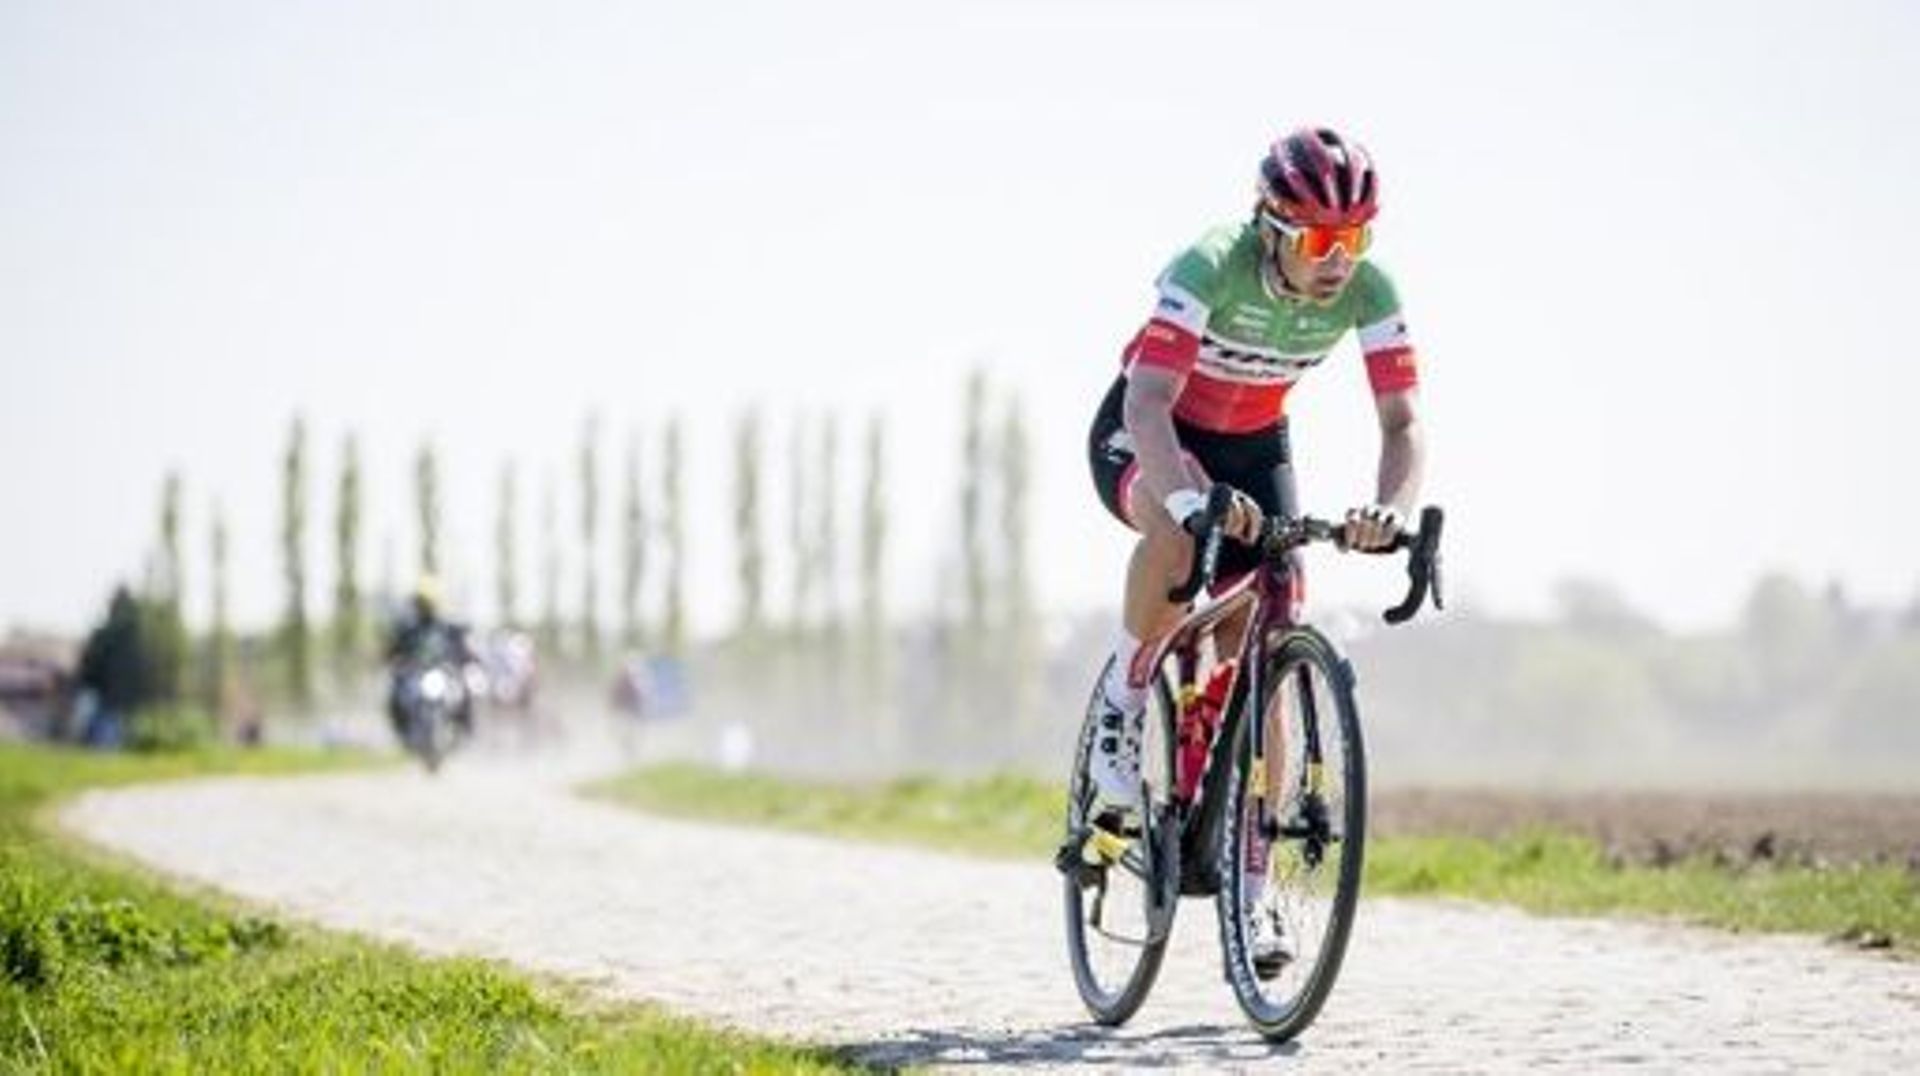 Italian Elisa Longo borghini of Trek – Segafredo pictured in action during the second edition of the women elite race of the 'Paris-Roubaix' cycling event, 124,7km from Denain to Roubaix, France on Saturday 16 April 2022. BELGA PHOTO JASPER JACOBS